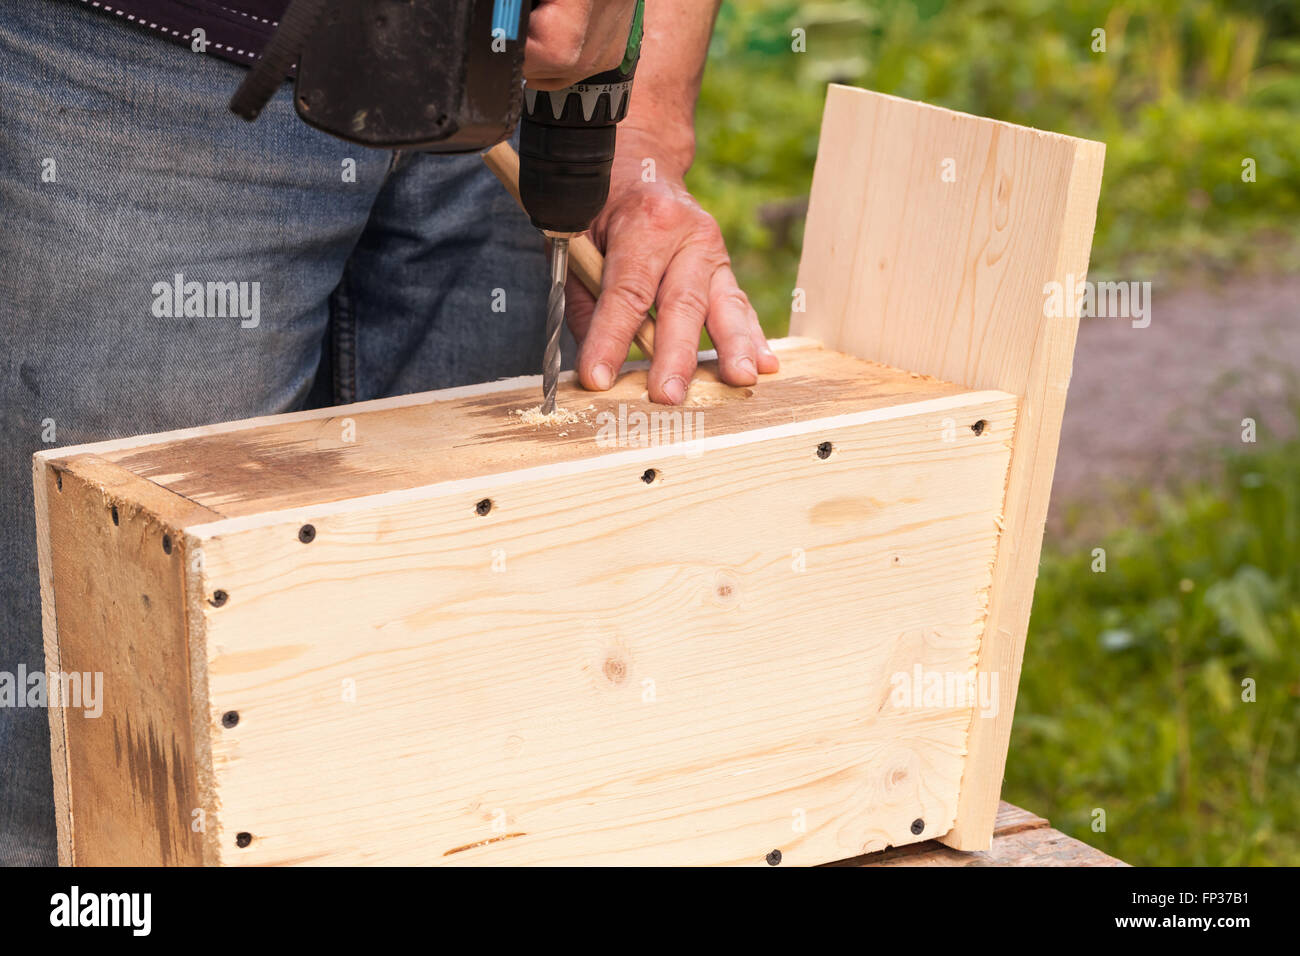 Wooden birdhouse is under construction, carpenter works with drill, closeup photo Stock Photo